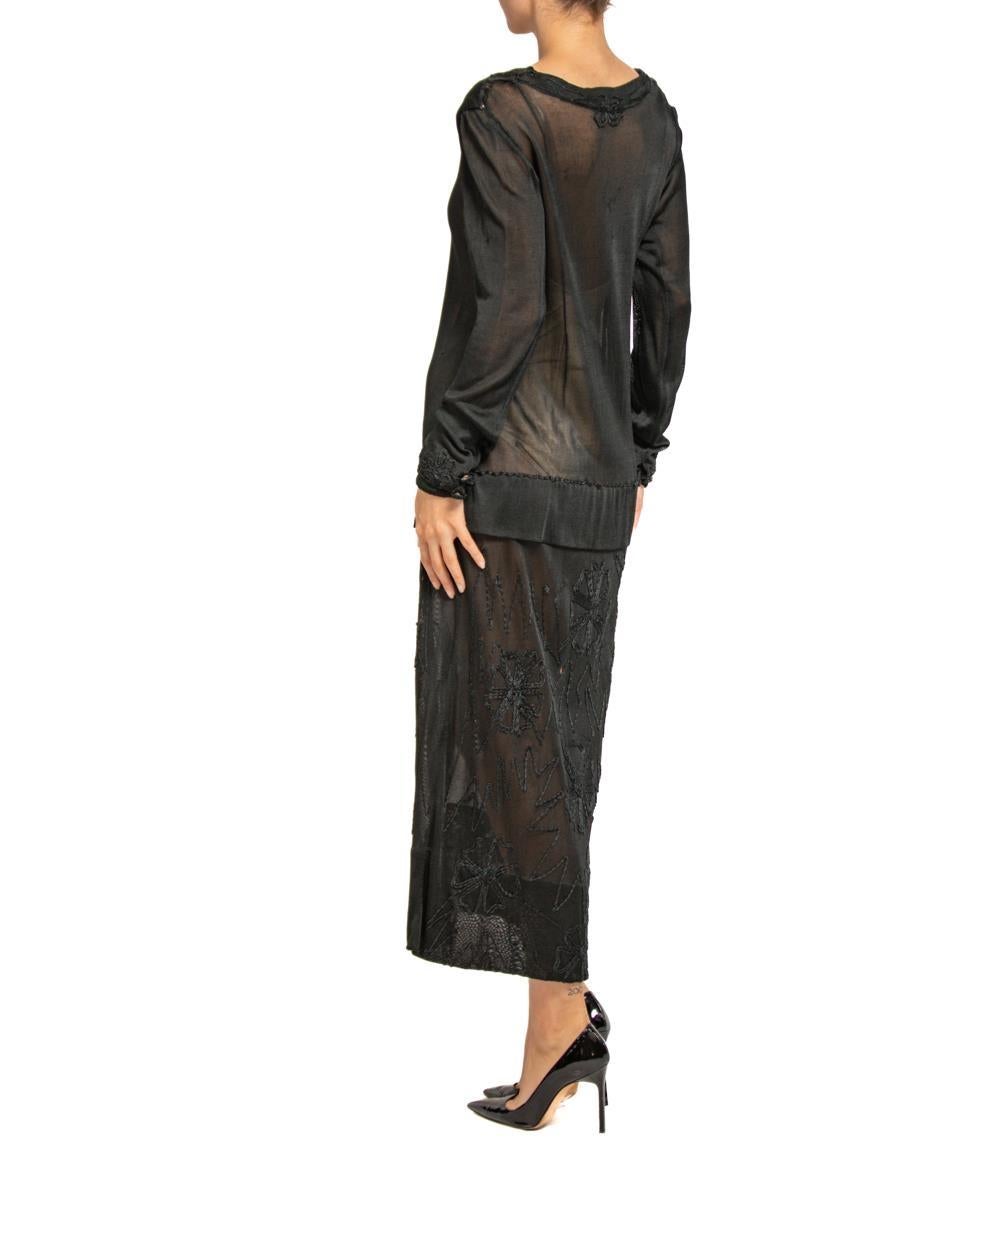 Women's 1920S Black Sheer Silk Jersey Dress With Floral Embroidery For Sale